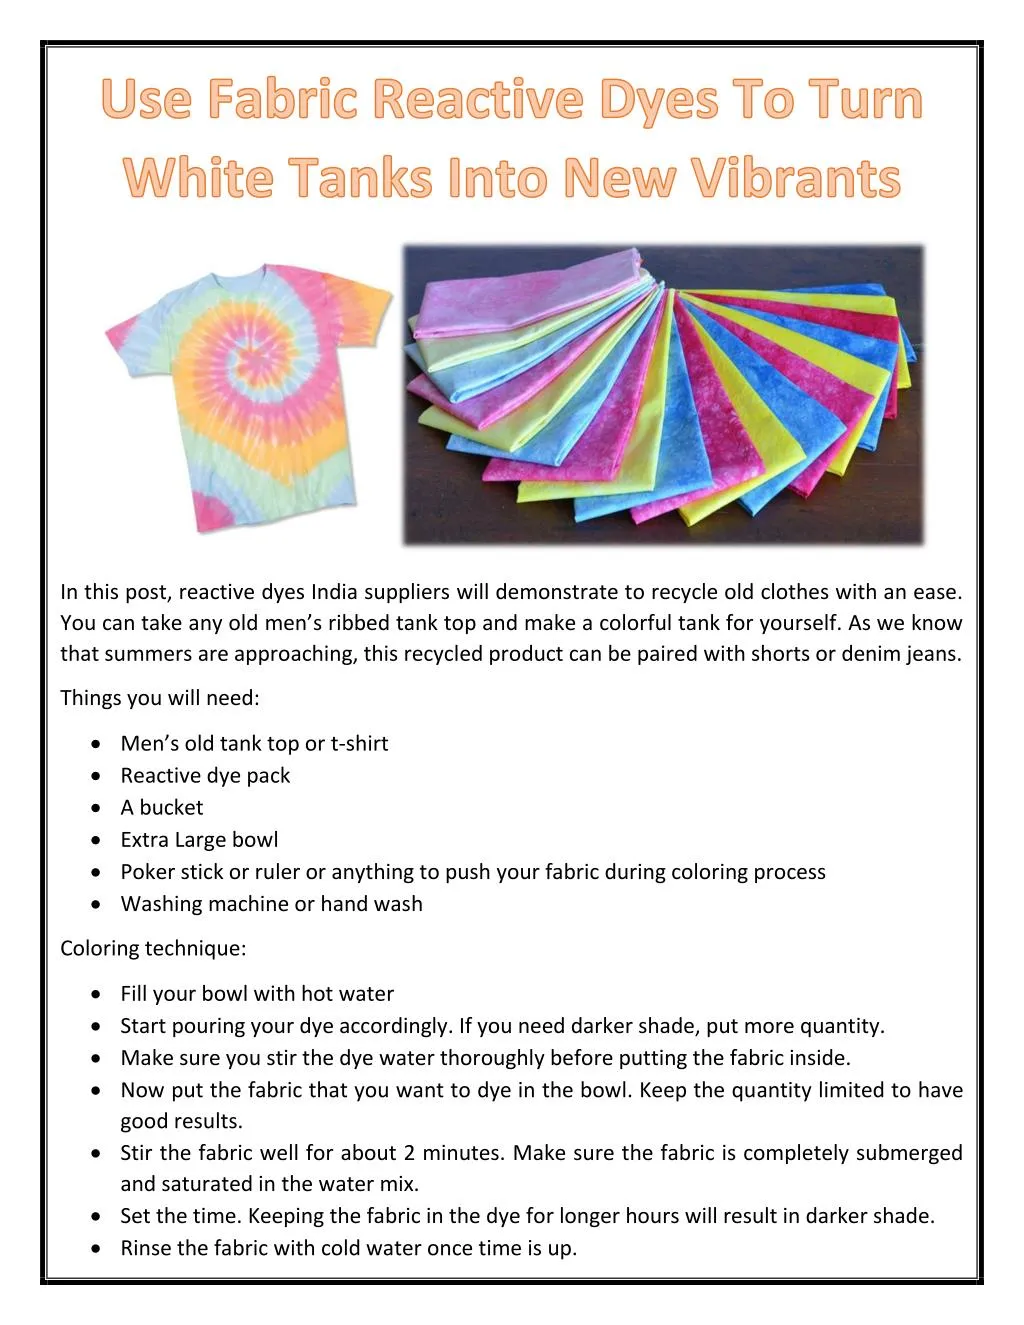 PPT - Use Fabric Reactive Dyes To Turn White Tanks Into New Vibrants ...